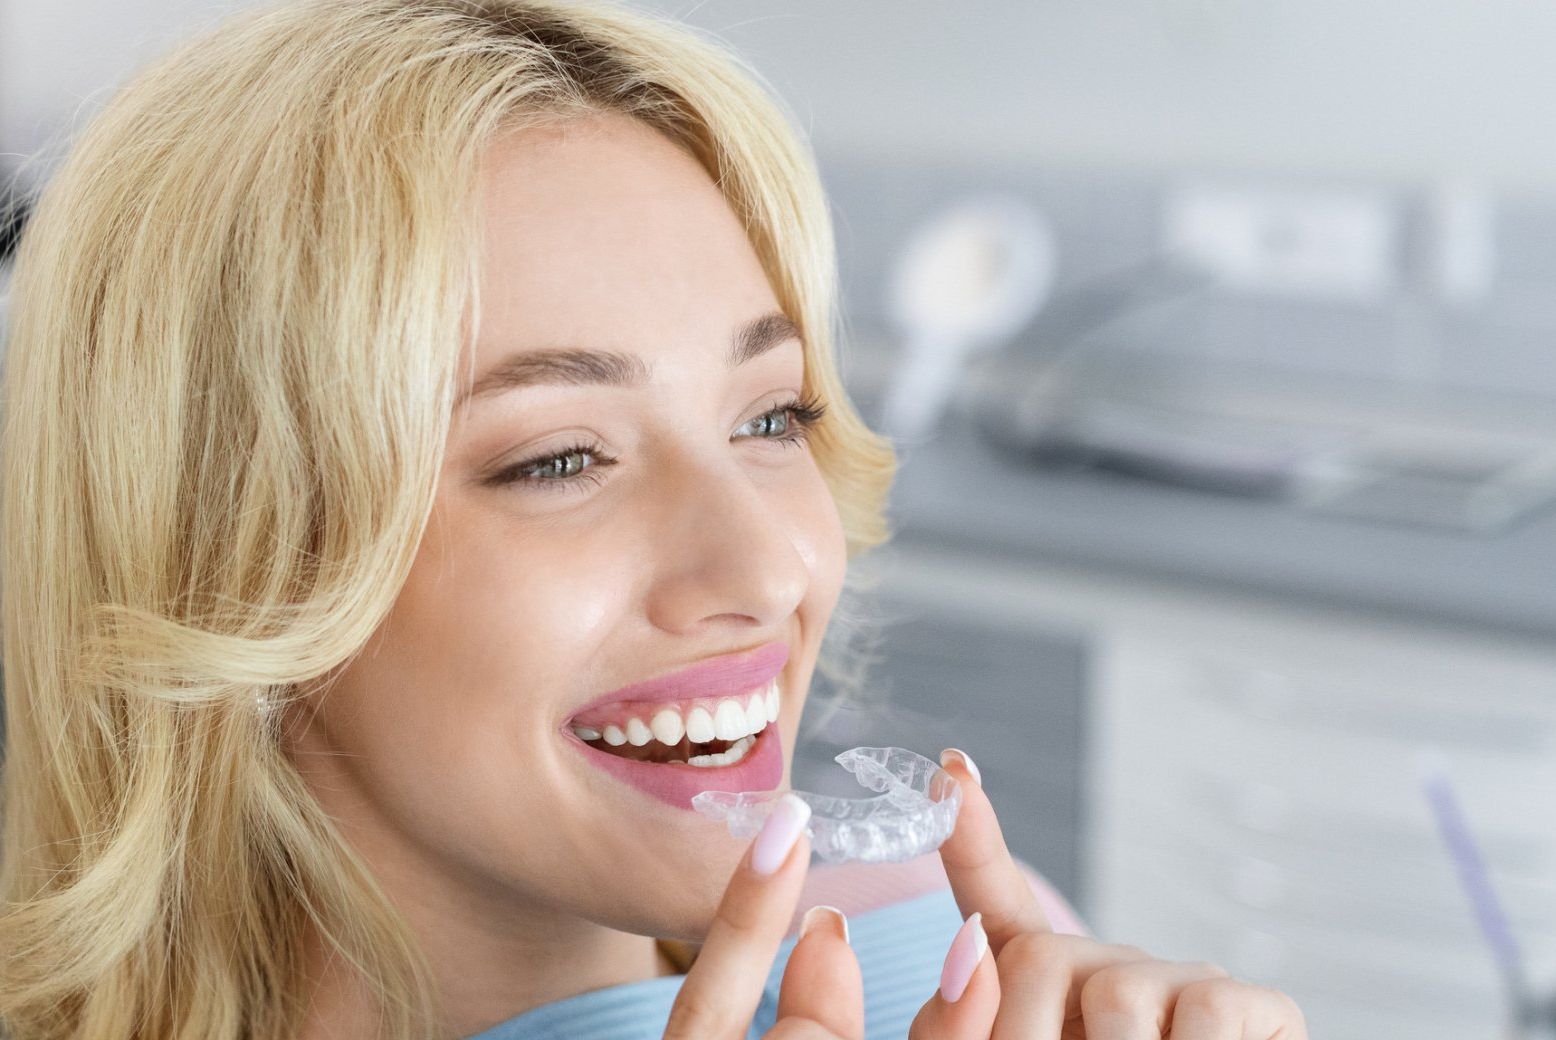 A woman is smiling while holding a clear retainer in front of her teeth.